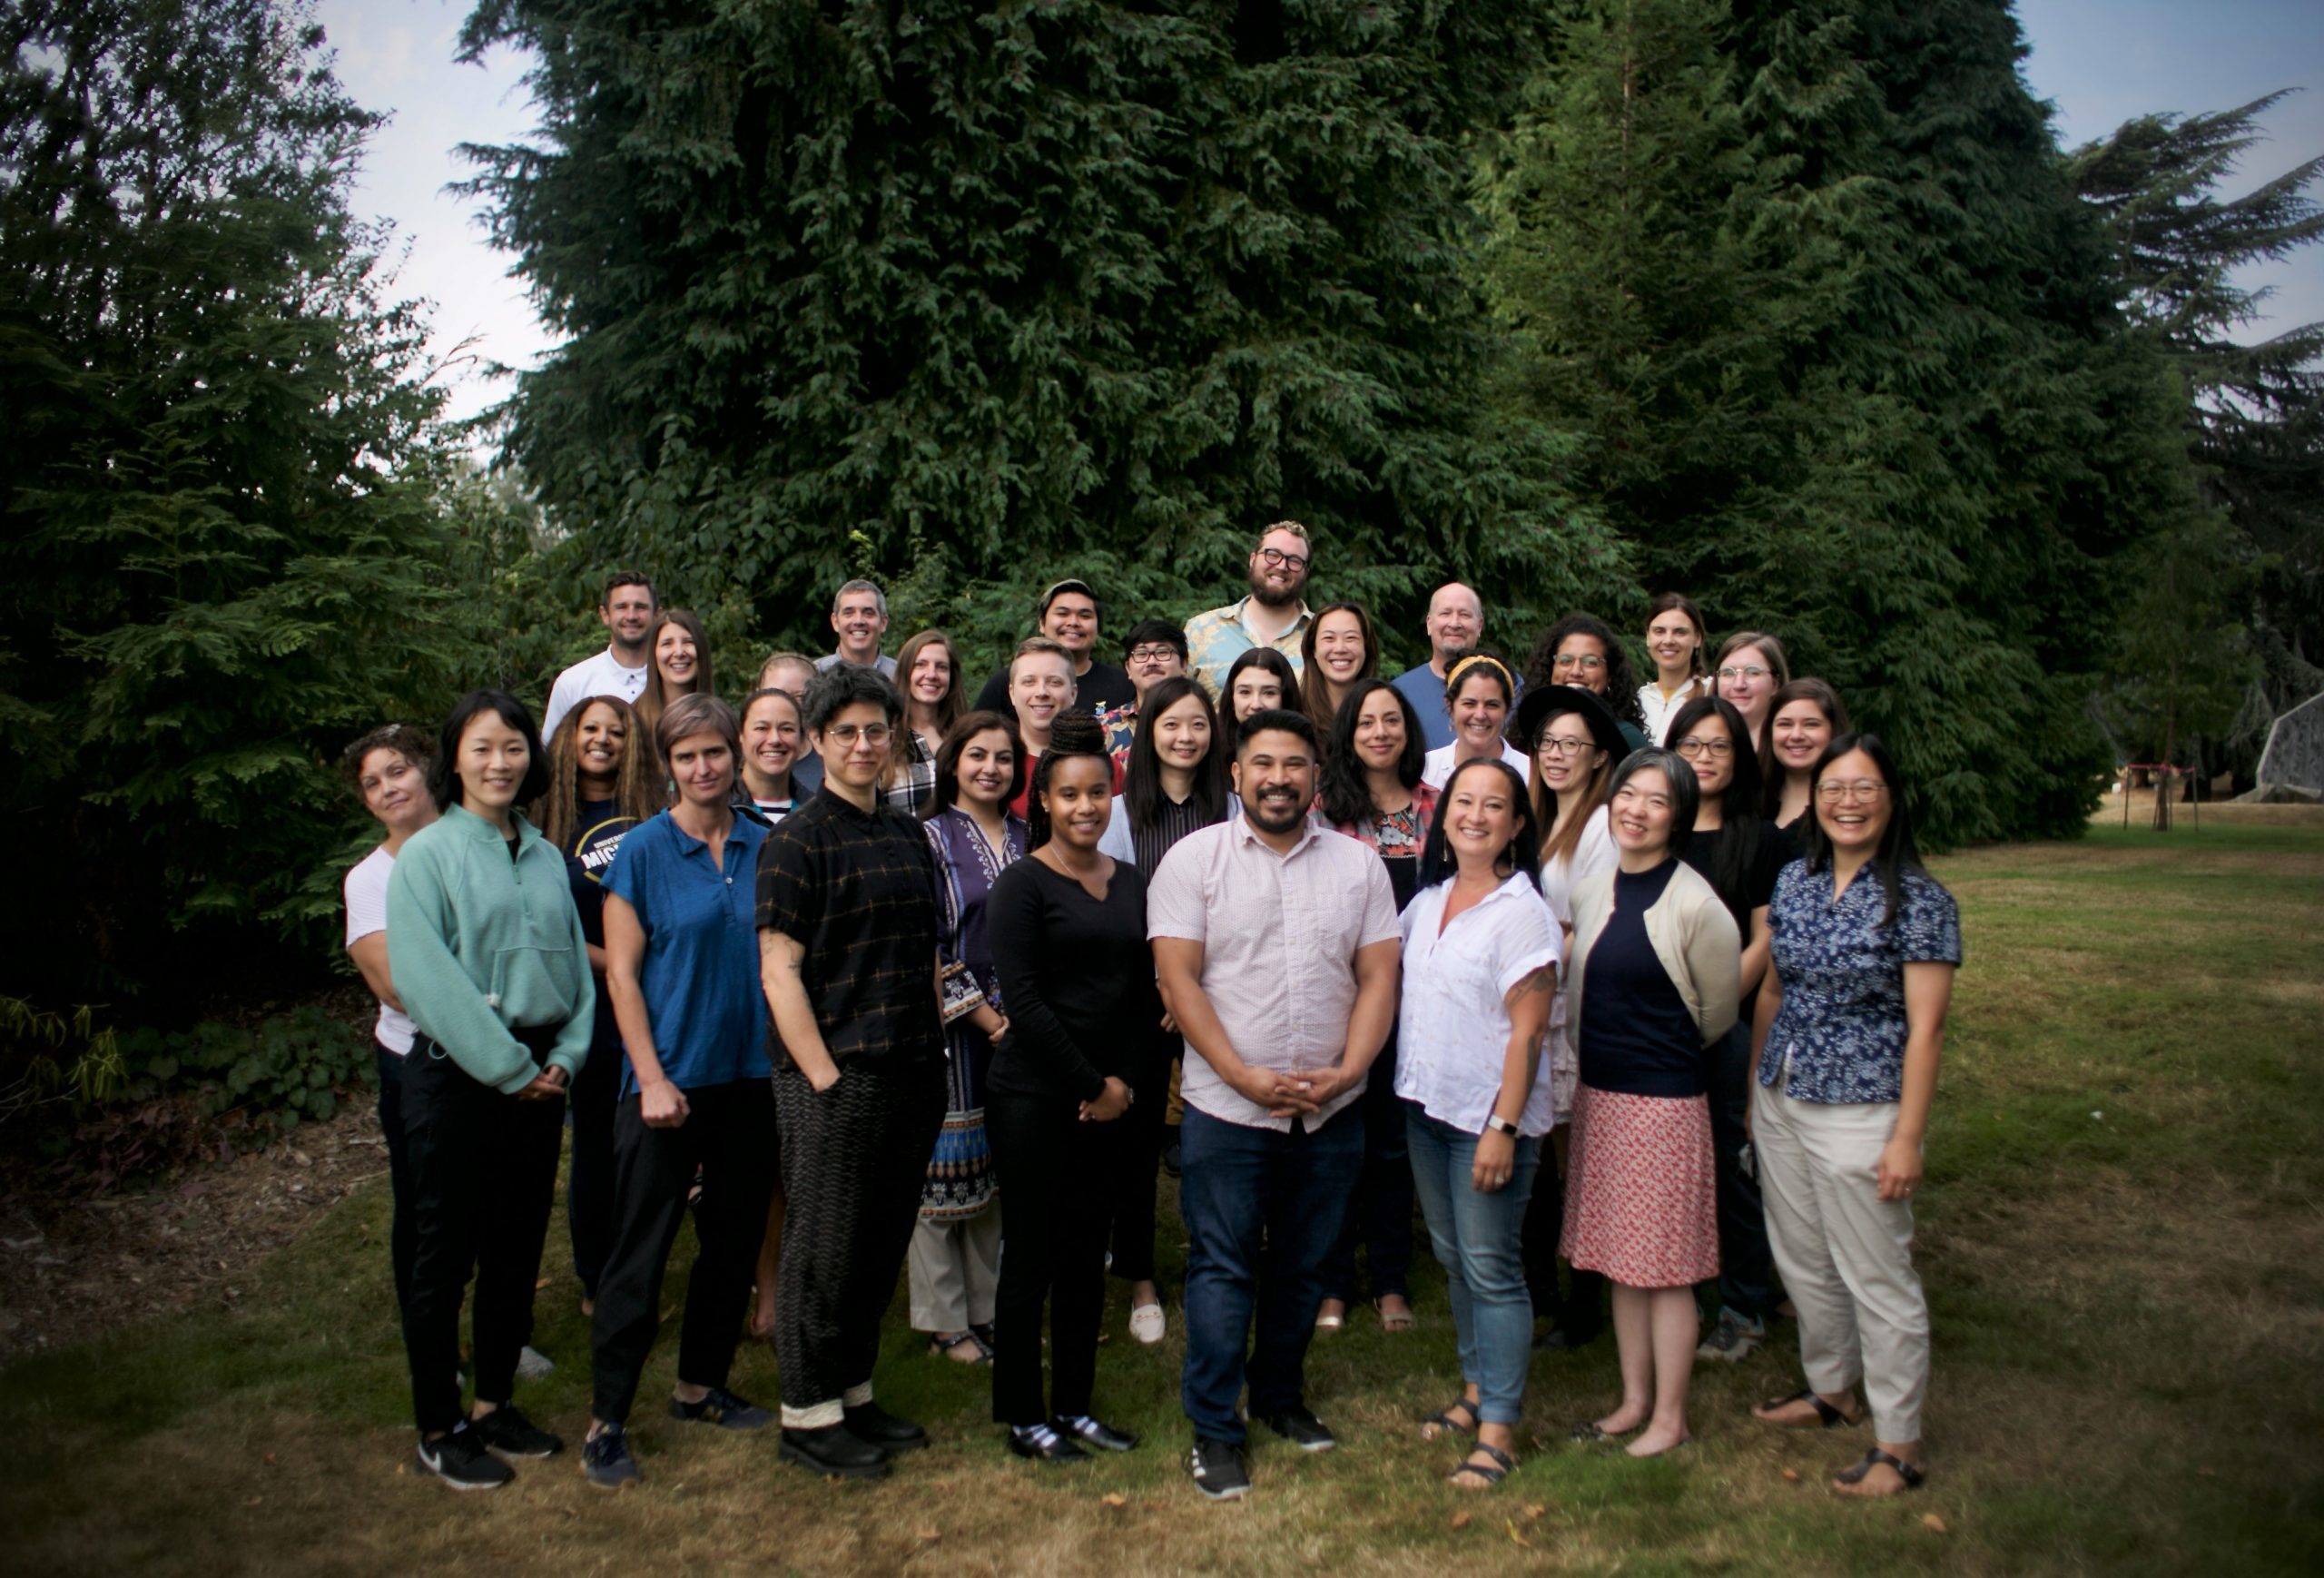 A photo of the Counseling Center Staff of 2022-2023. The group is smiling at the camera standing in front of a wooded area.